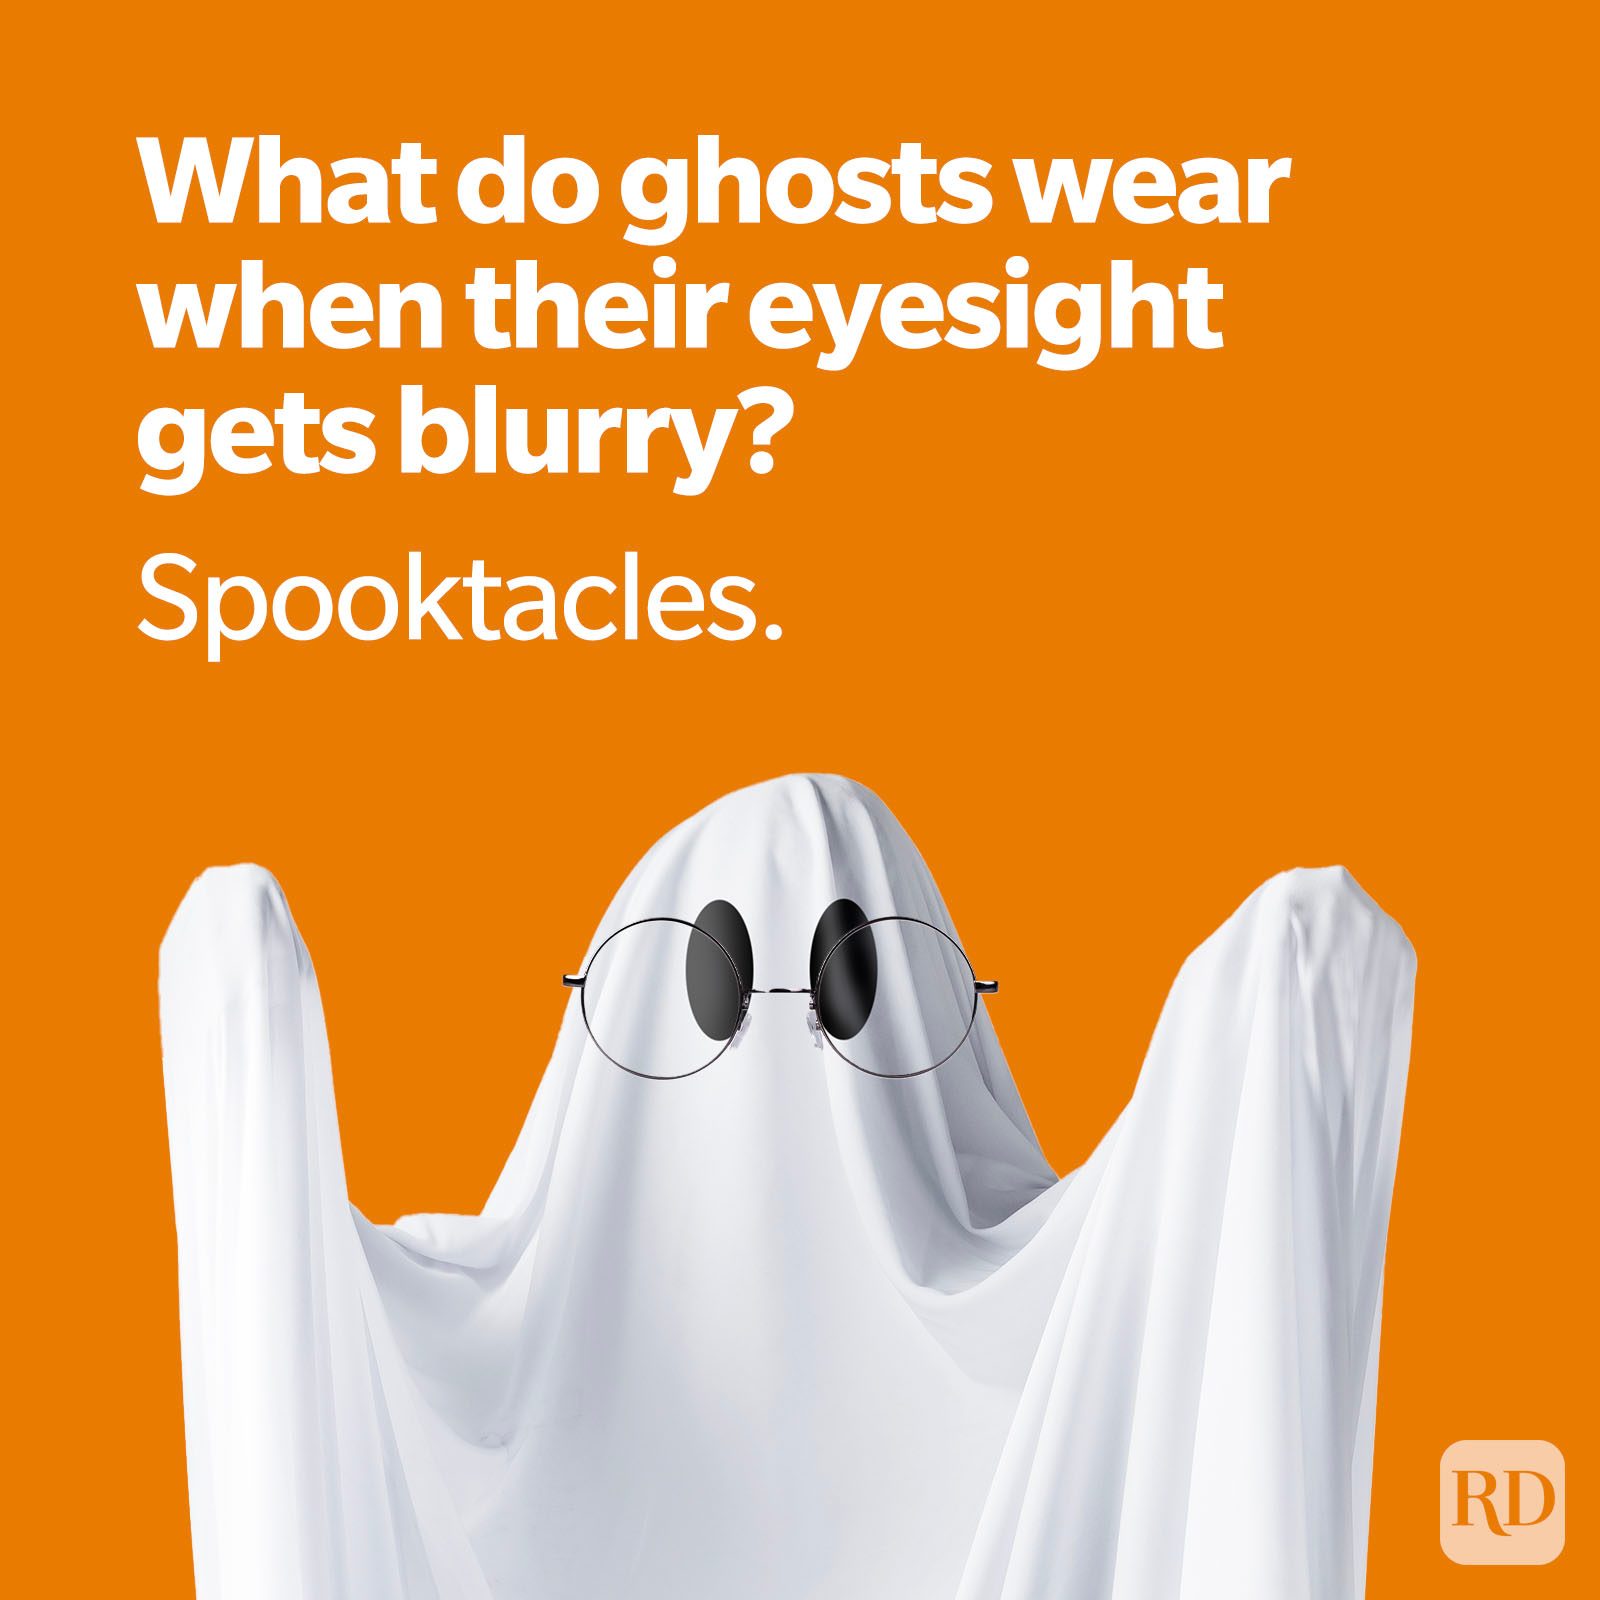 Halloween Crack-the-Code Jokes for All Ages!